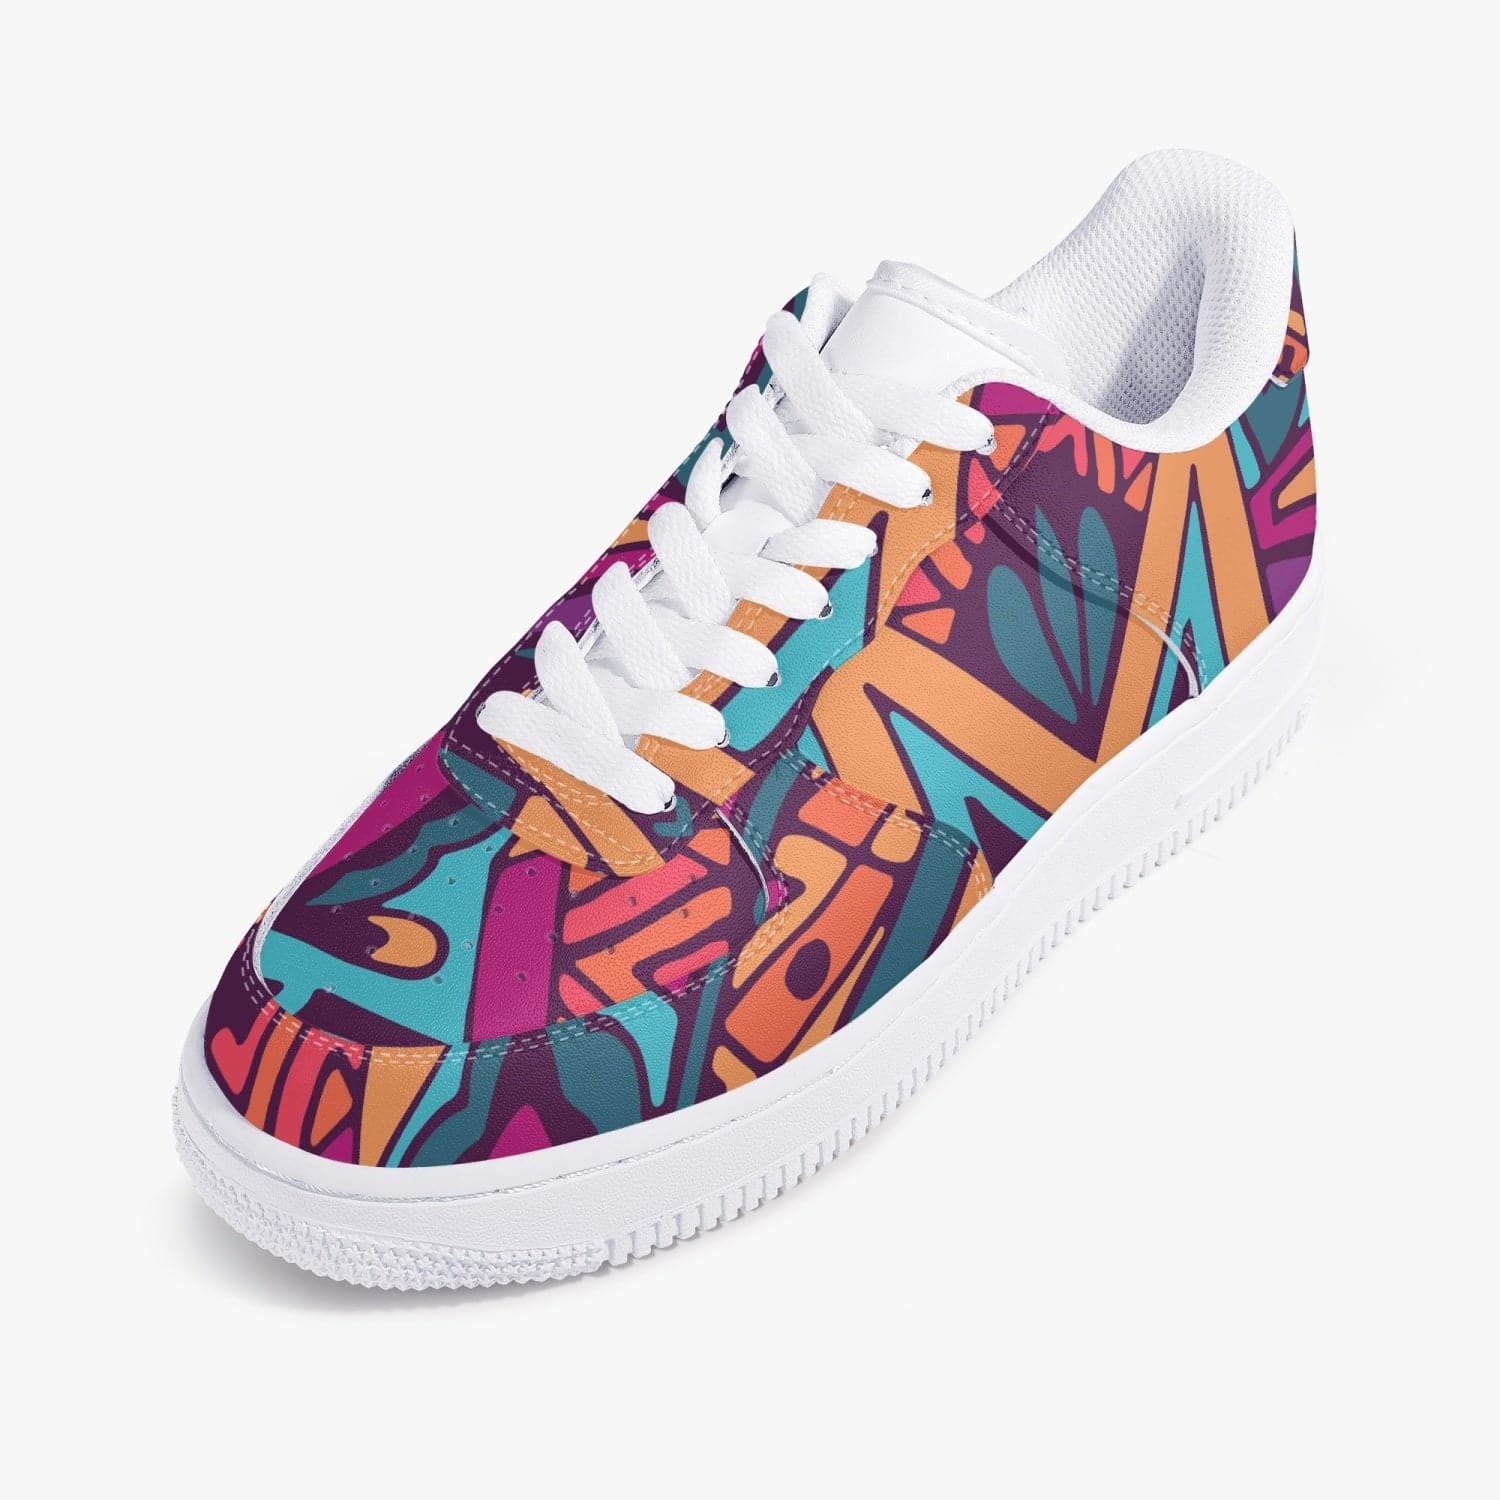 Colorful Etnic Bow, Trendy design 2022 New Low-Top Leather Sports Sneakers, by Sensus Studio